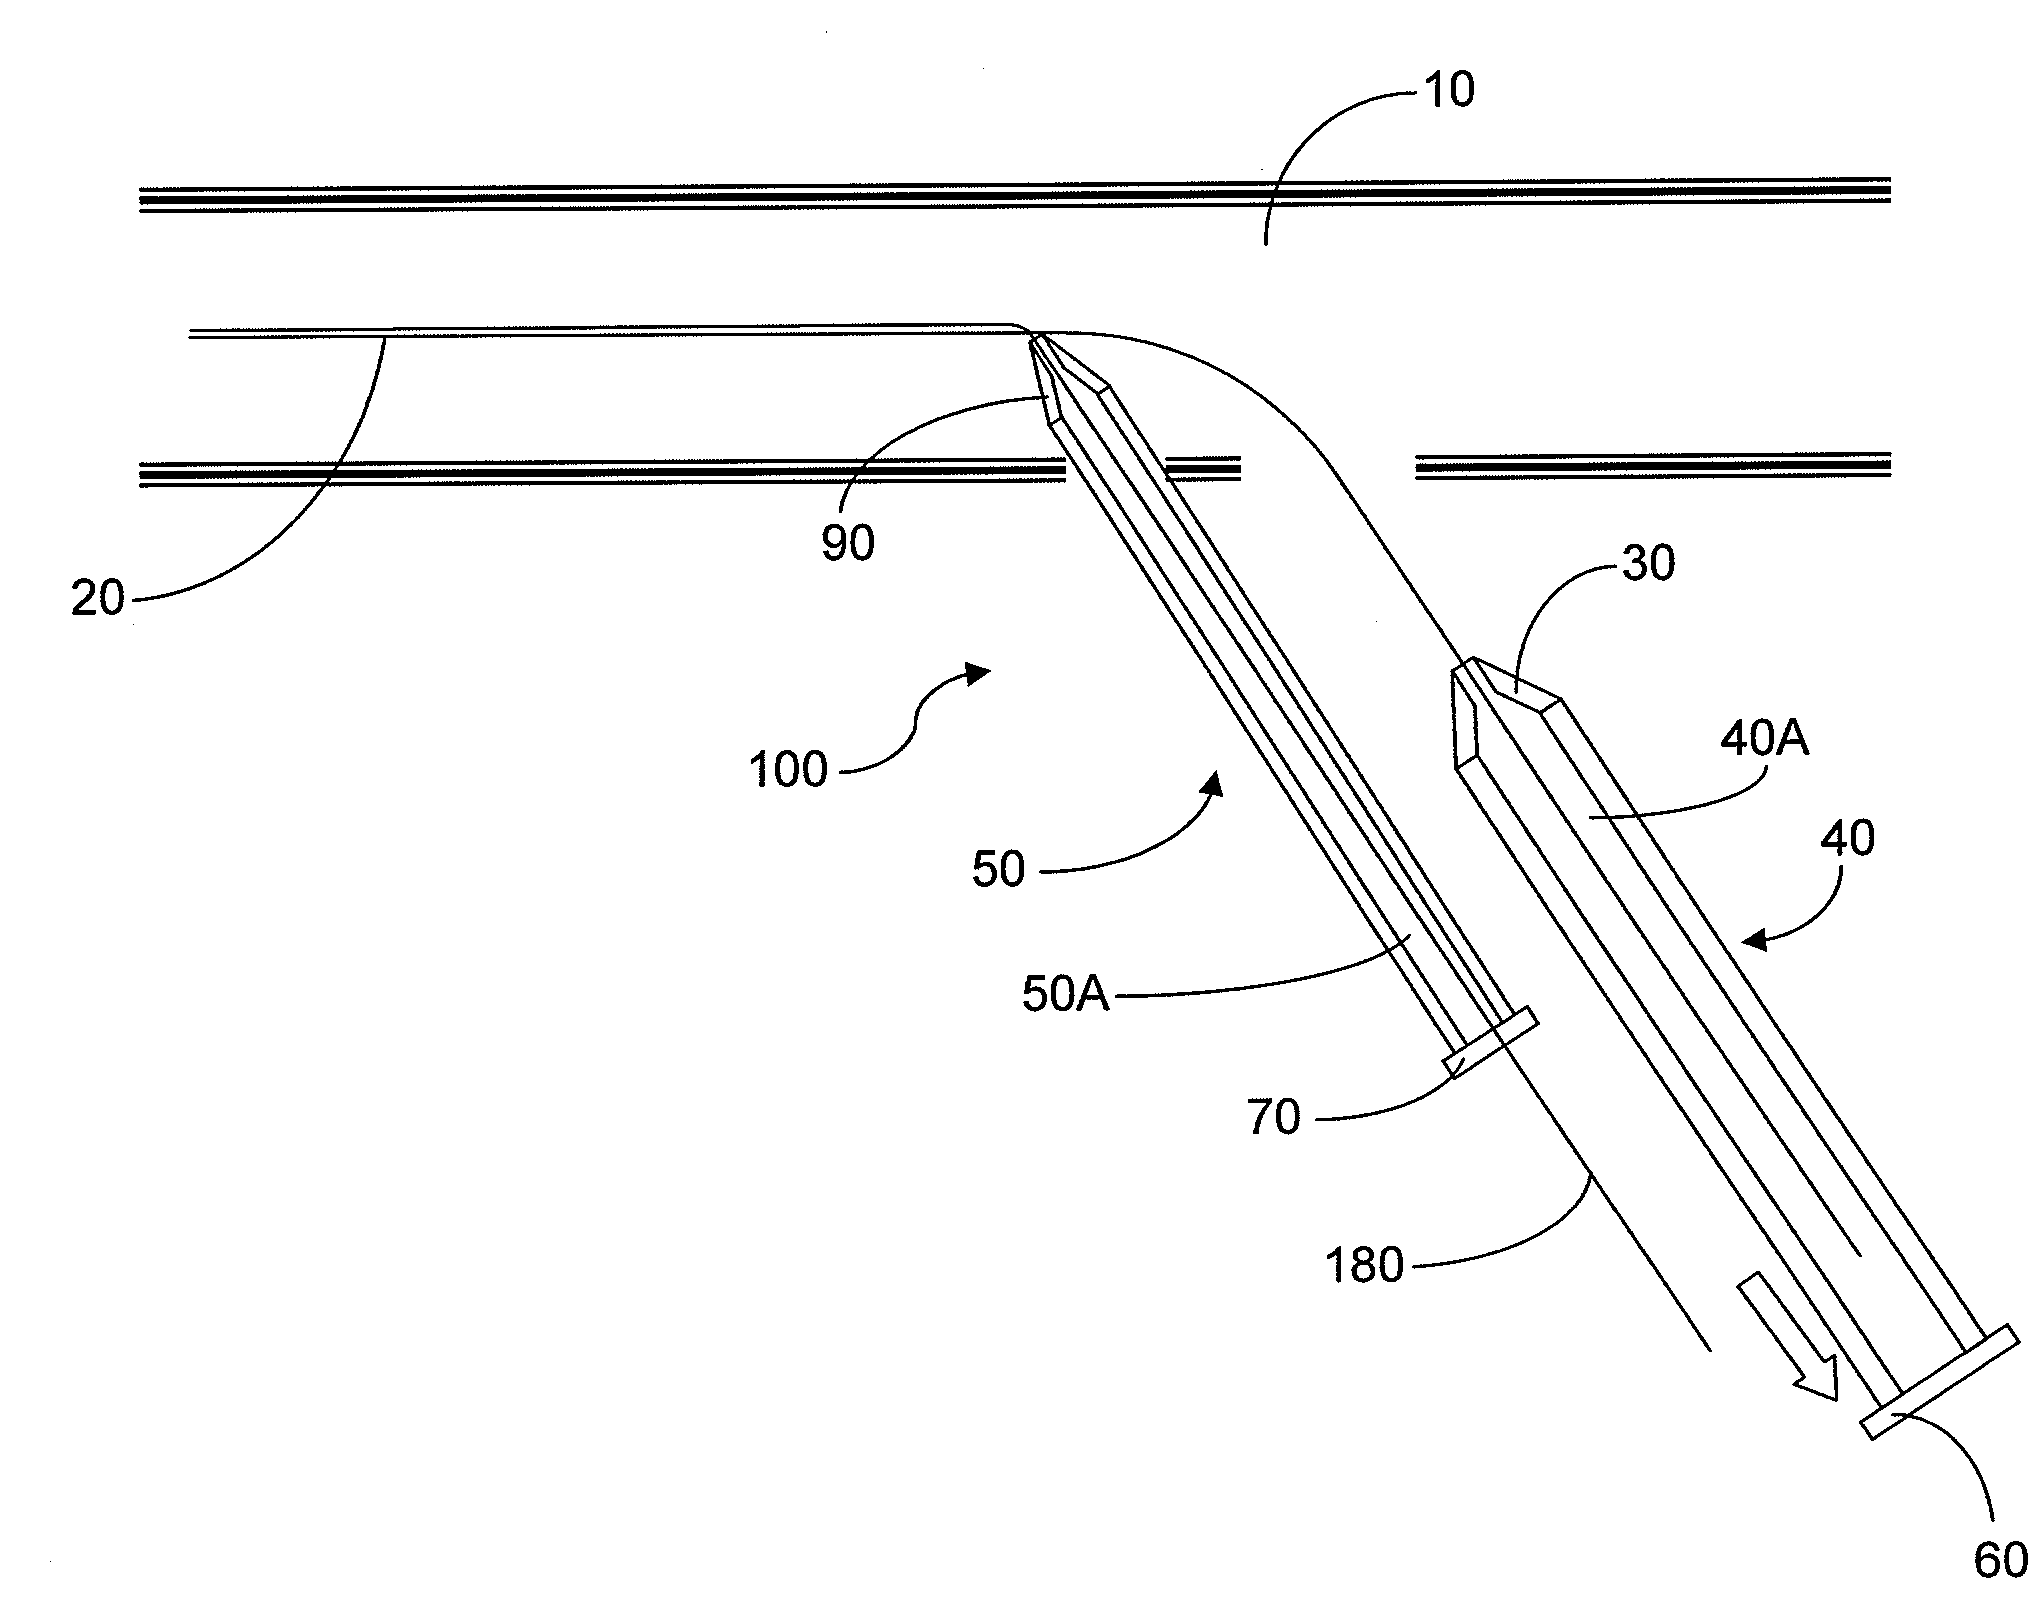 Apparatus and Associated Method for Facilitating Implantation of Leads of a Cardiac Pacemaker